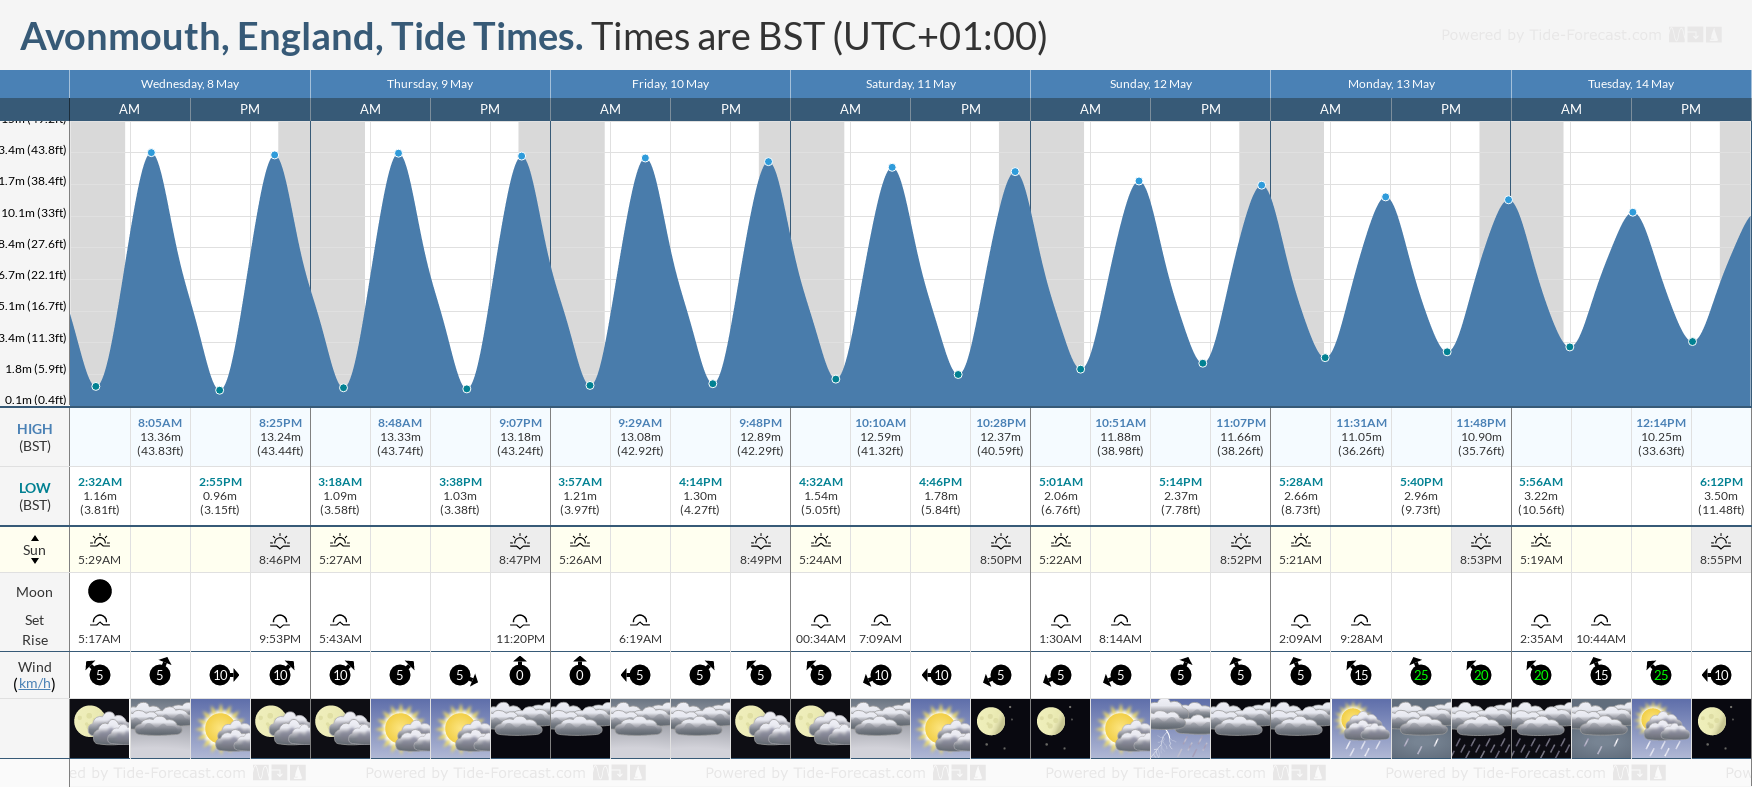 Avonmouth, England Tide Chart including high and low tide tide times for the next 7 days